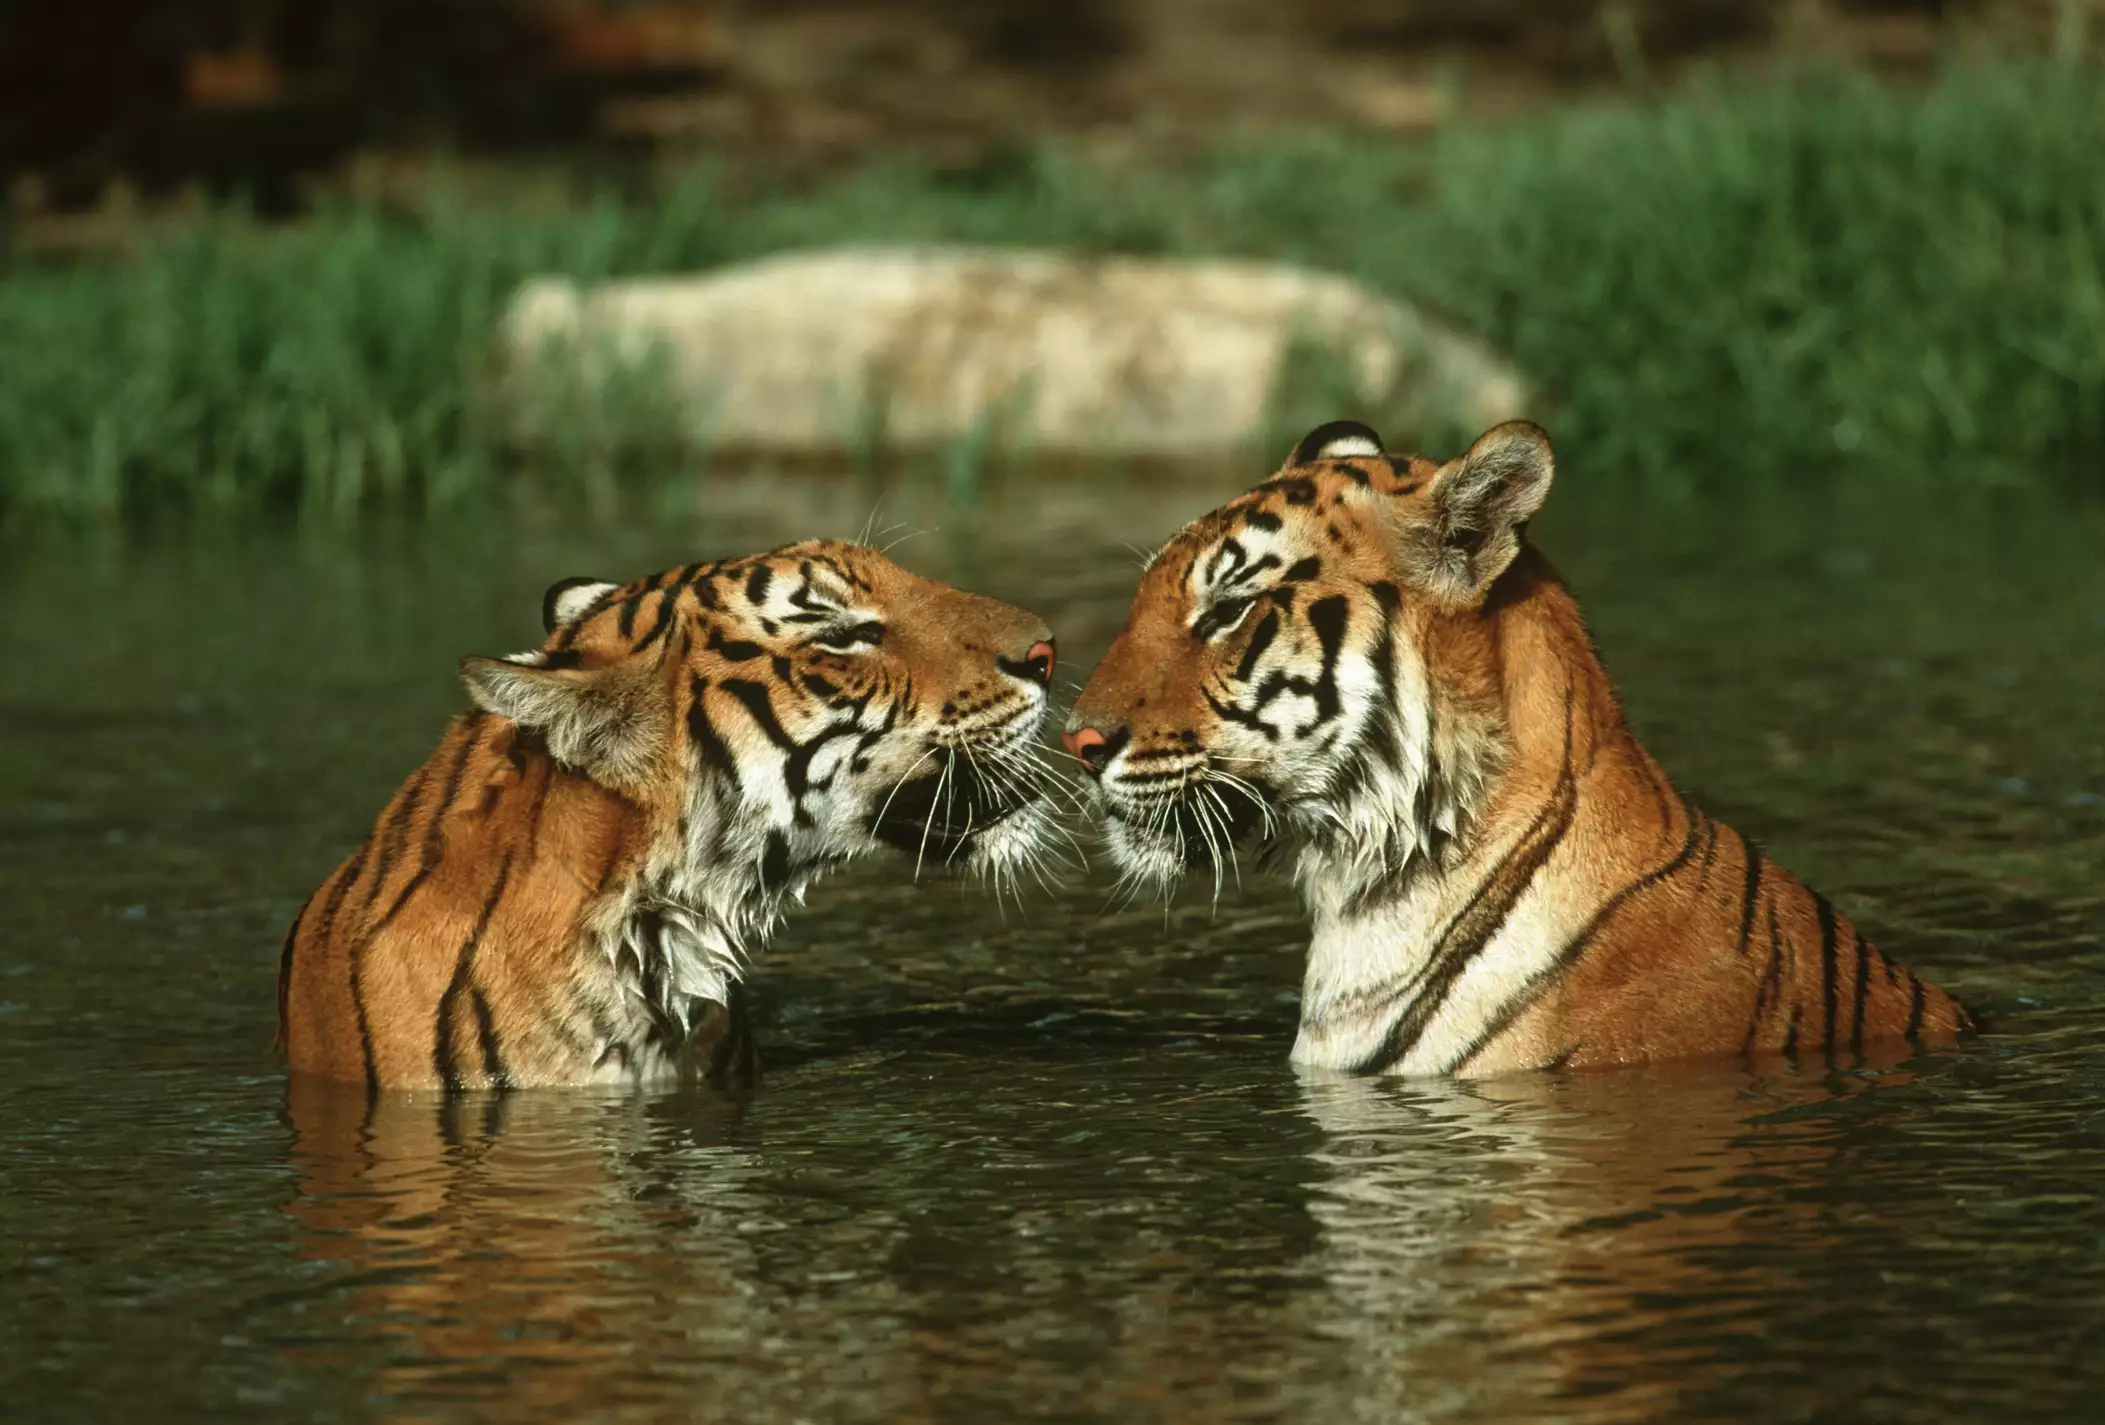 Two tigers, nose to nose, chest deep in a river